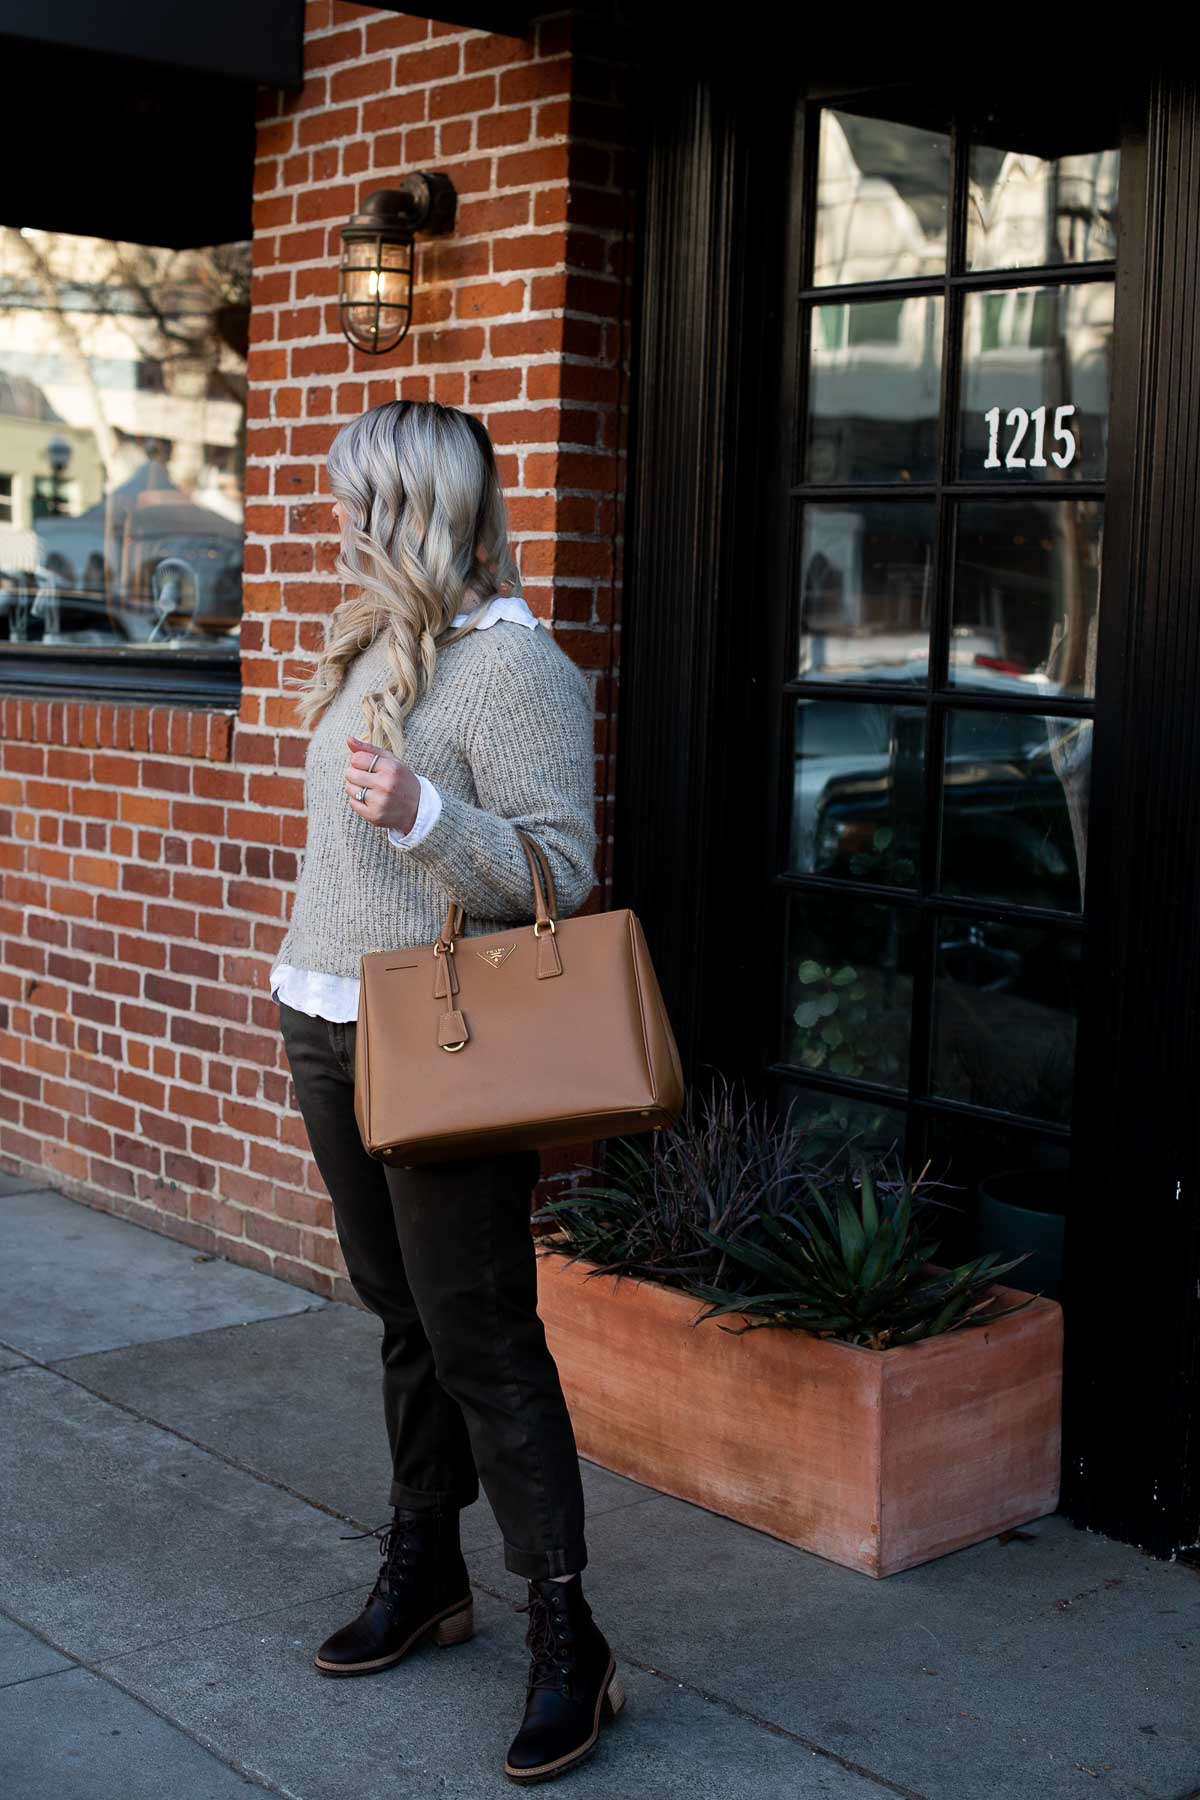 Linen in Winter Outfit - White LInen Button down under cashmere sweater, chinos, Prada tote, and Timberland boots